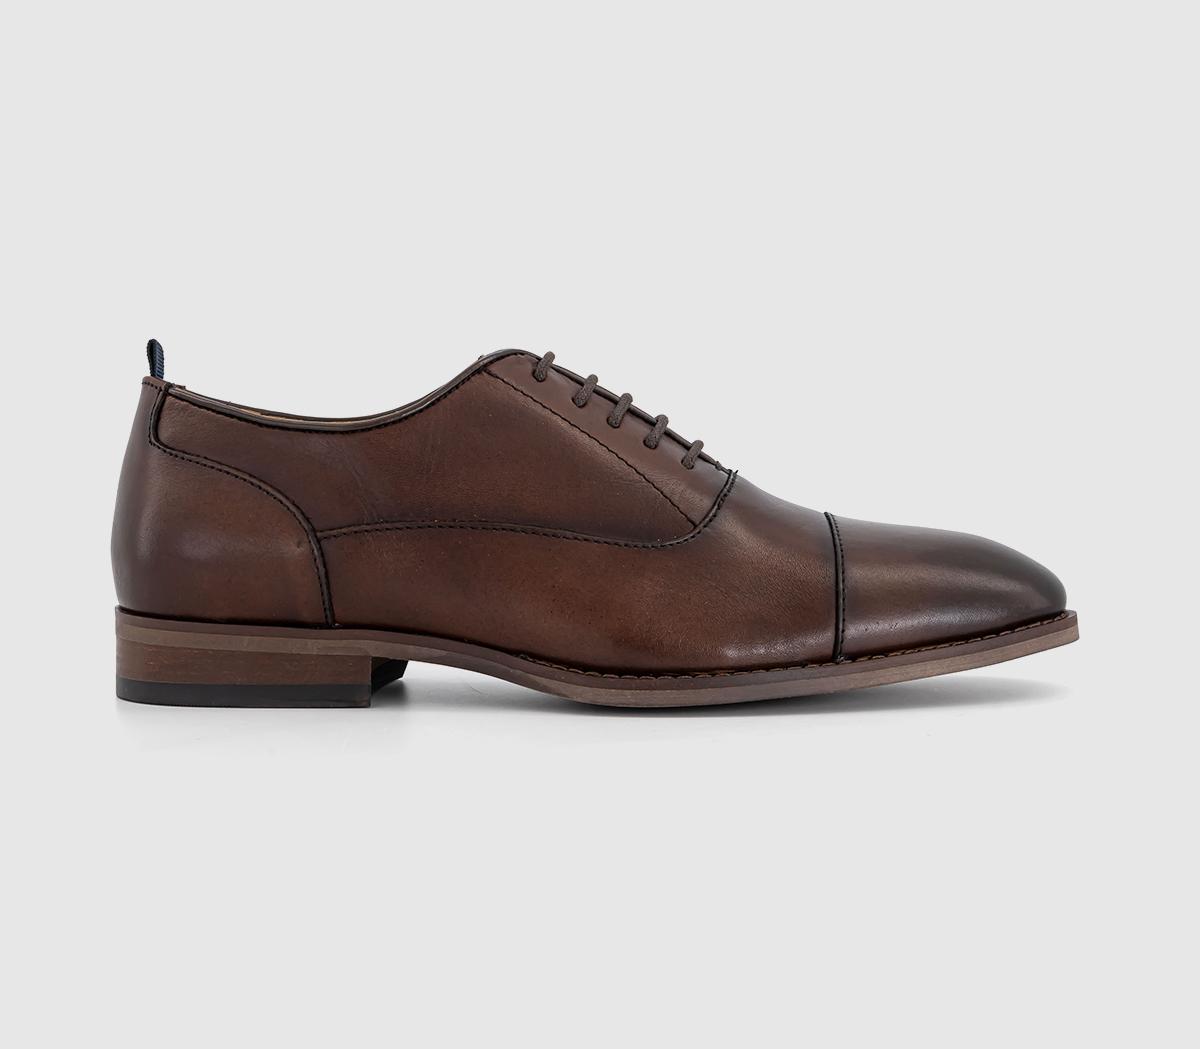 Montana Toecap Oxford Shoes Brown Leather